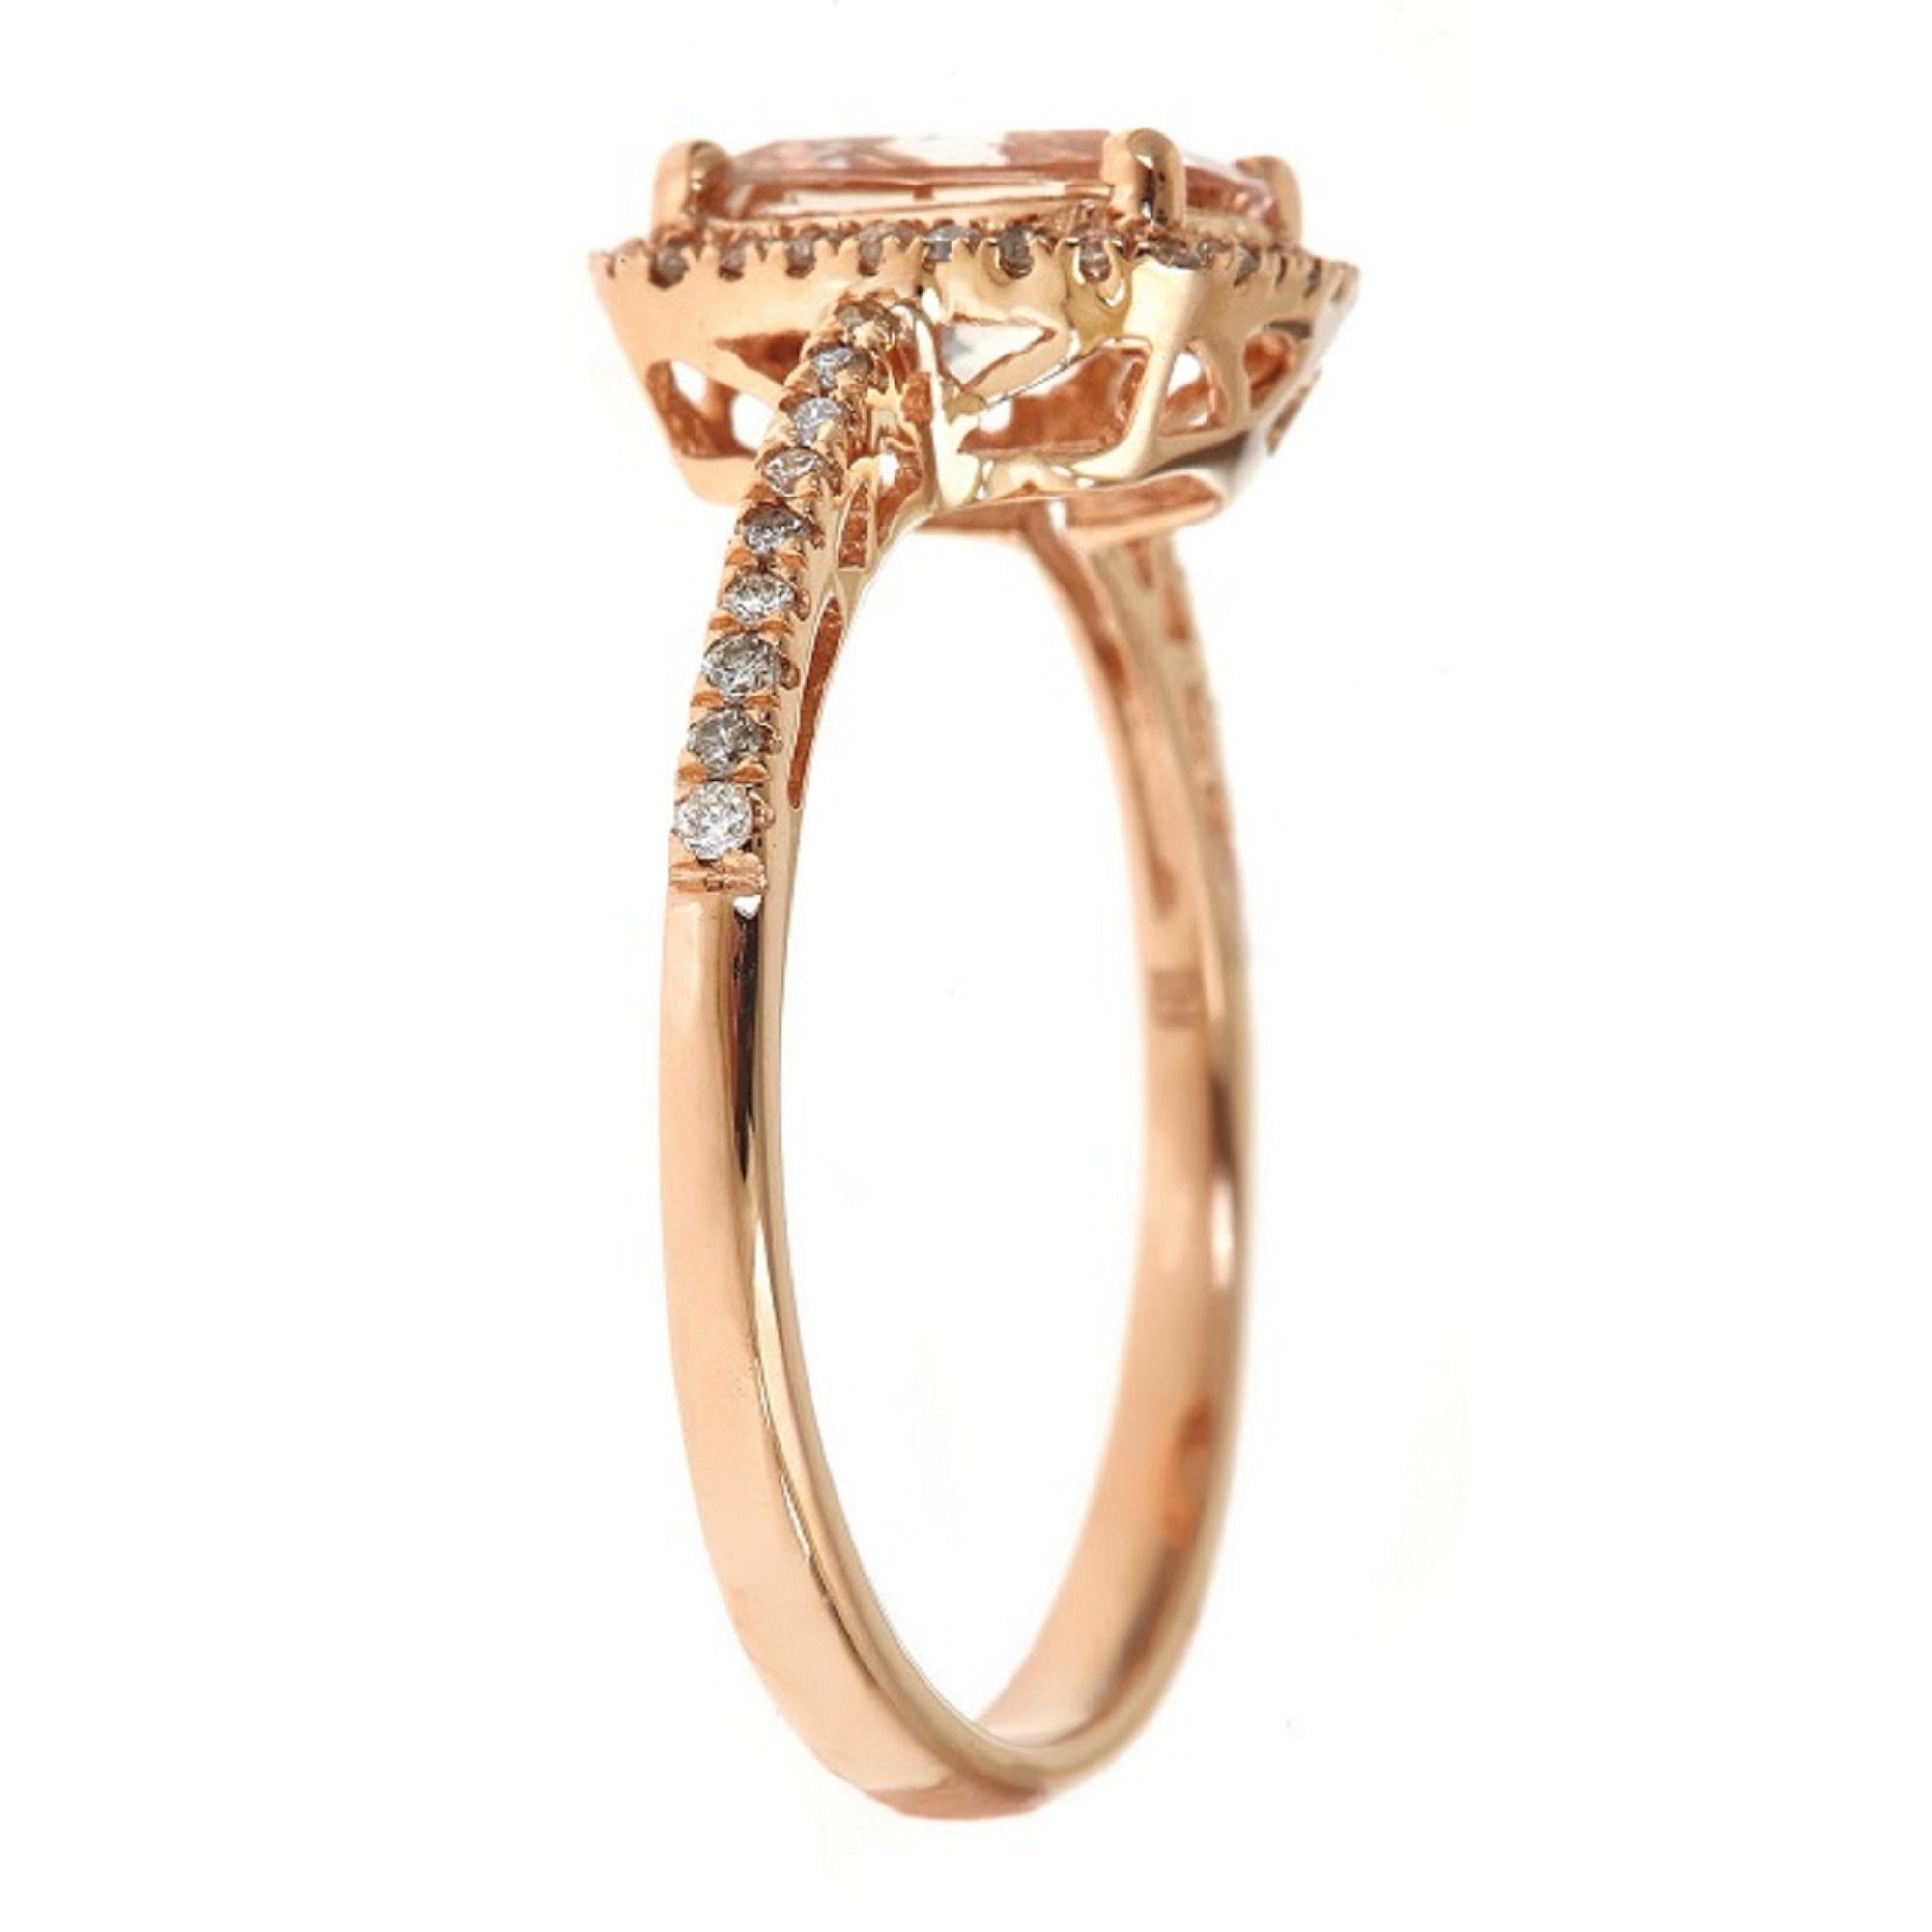 Wrapped in stunning white diamonds, the large Gin & Grace Genuine morganite gemstone of this ring catches the light effortlessly and adds subtle color to this gorgeous jewelry. Crafted beautifully, this cushion-cut ring is the perfect way to stay